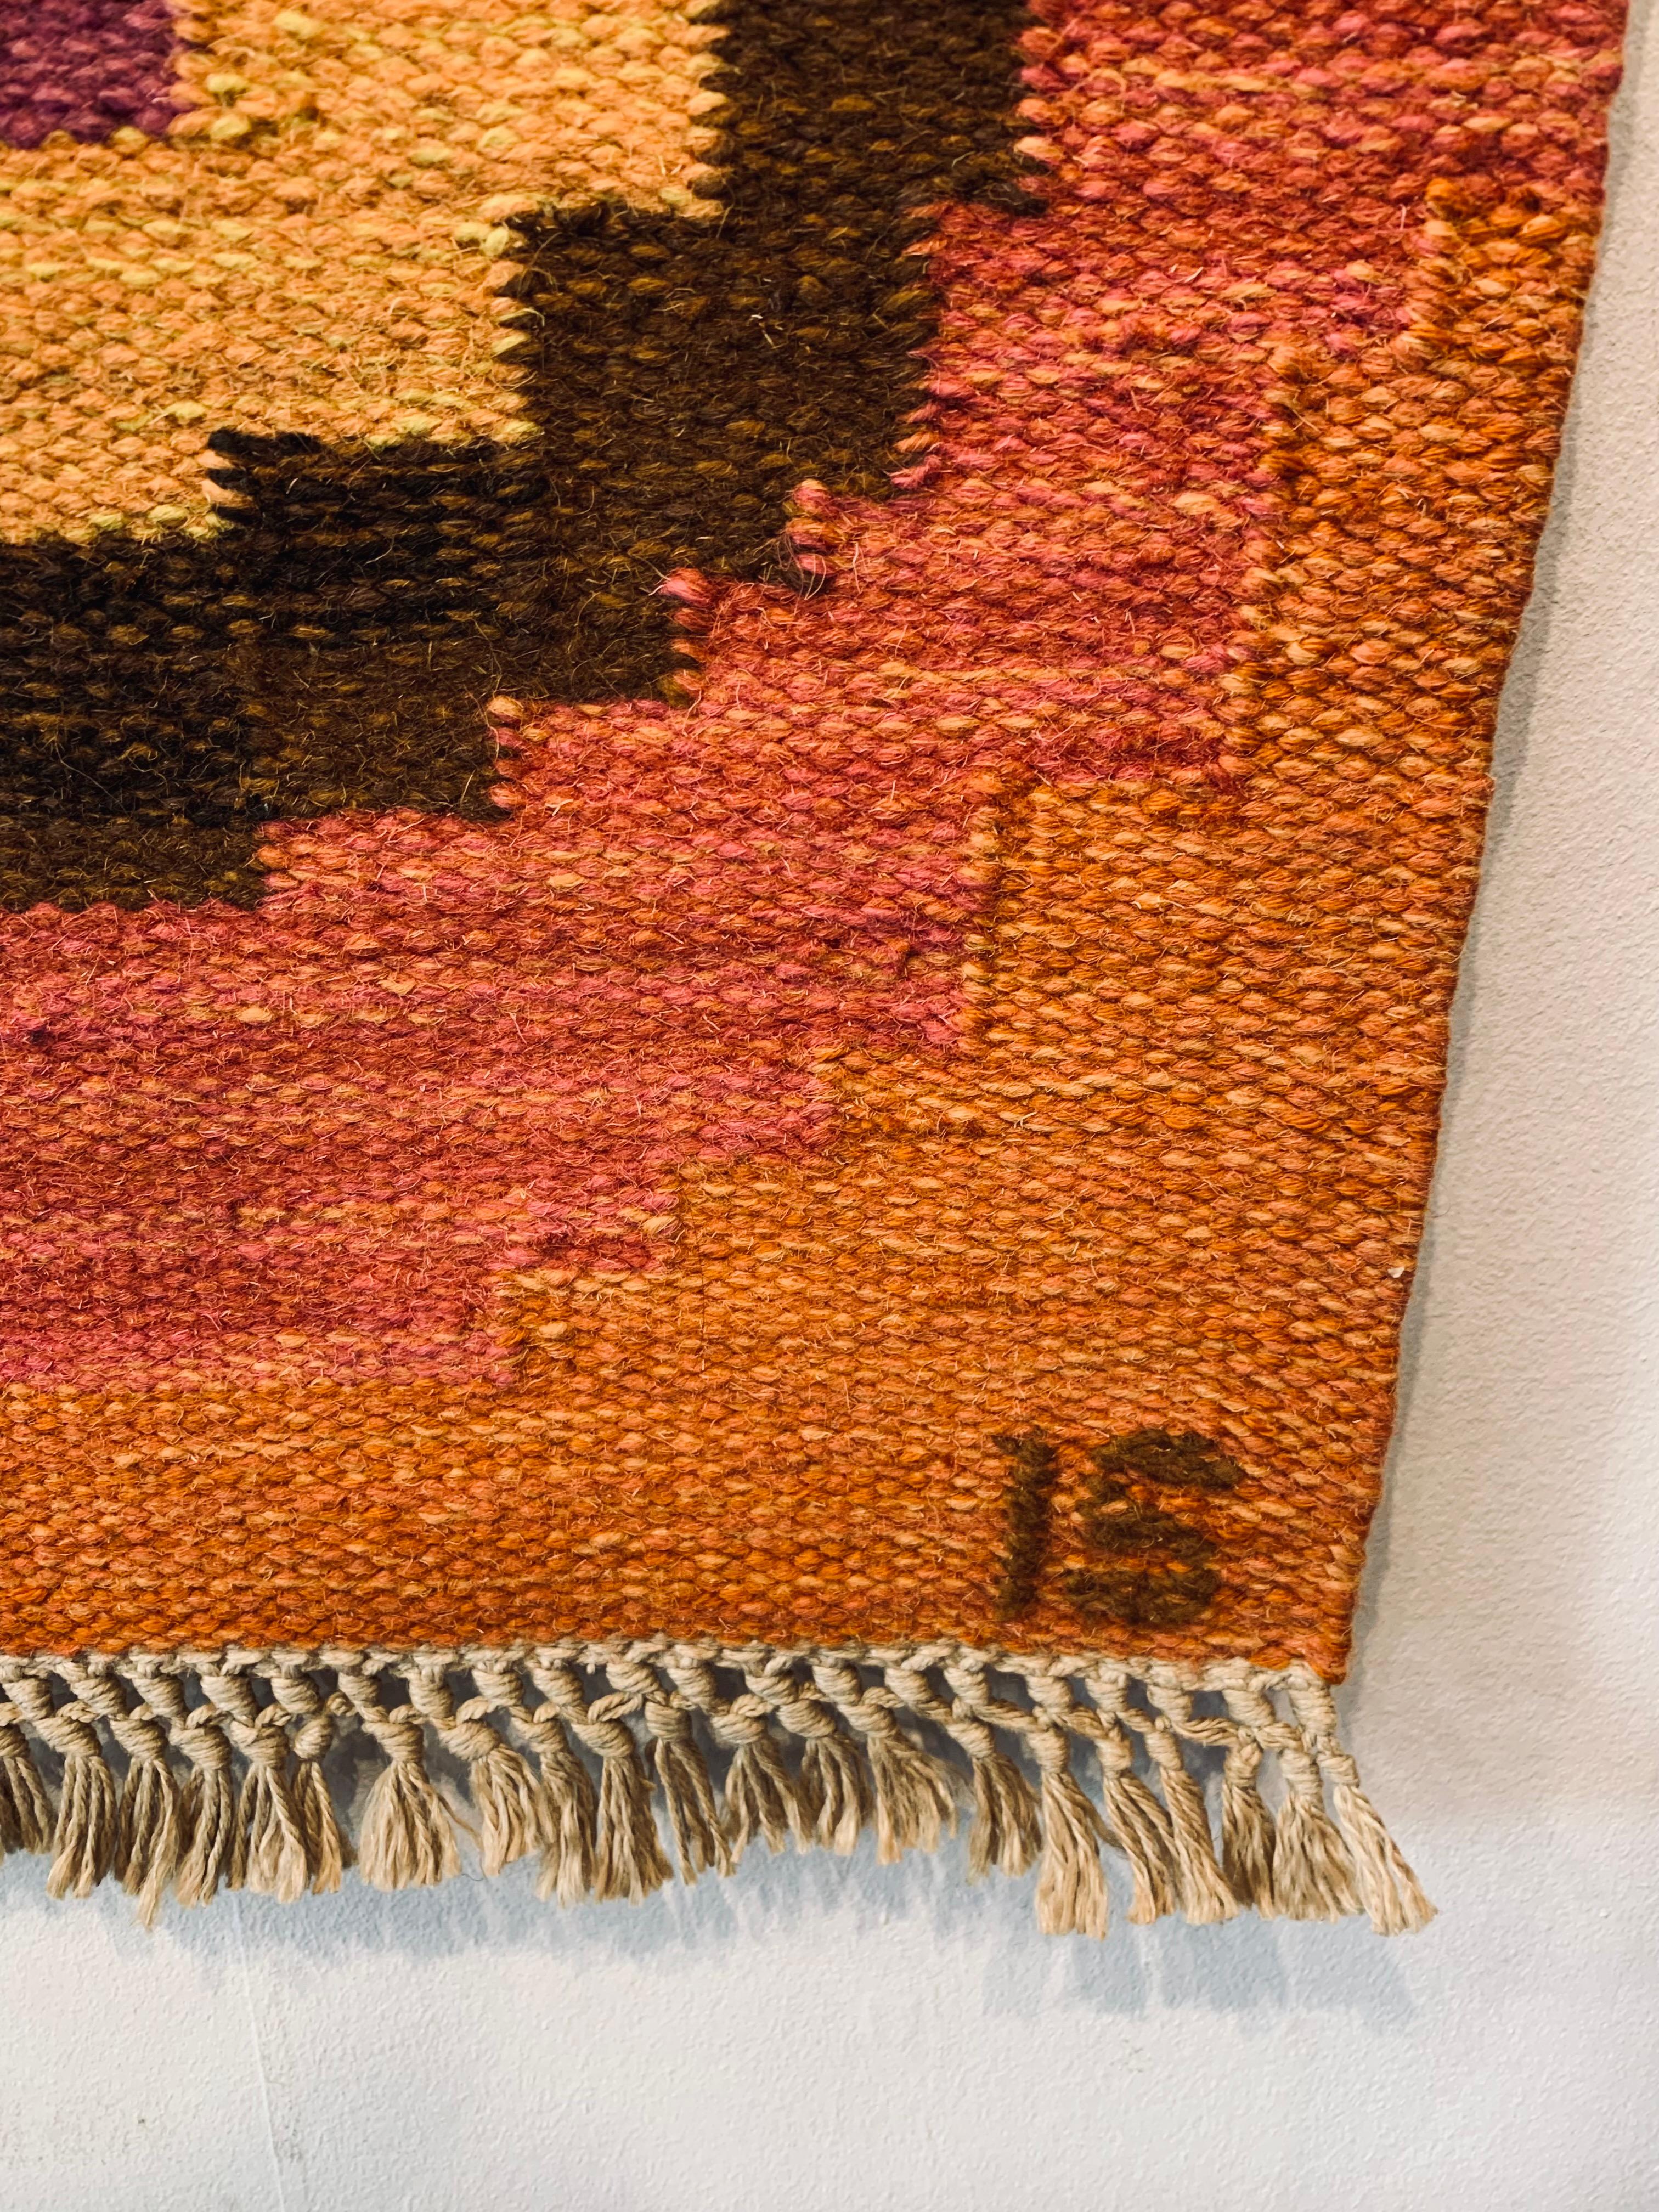 Hand-Crafted Mid Century Swedish Abstract and Geometric Kilim by Artist Ingegerd Silow